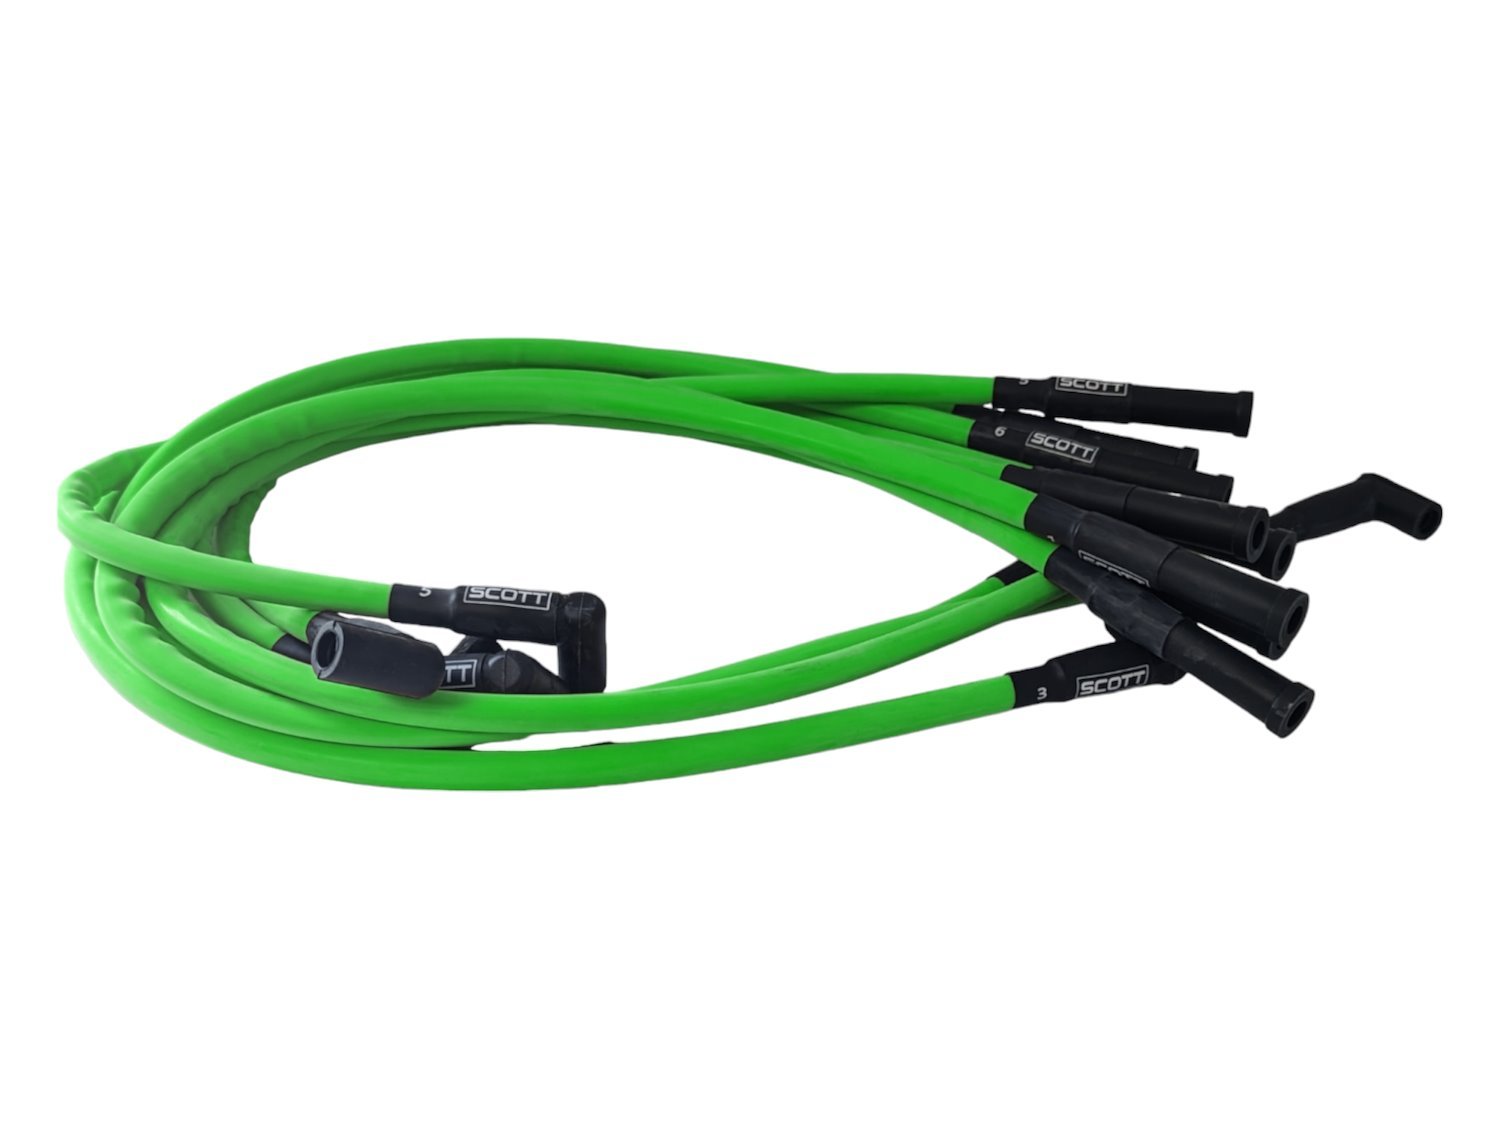 SPW-CH-660-8 High-Performance Silicone-Sleeved Spark Plug Wire Set for Small Block Dodge, Over Valve Cover [Fluorescent Green]